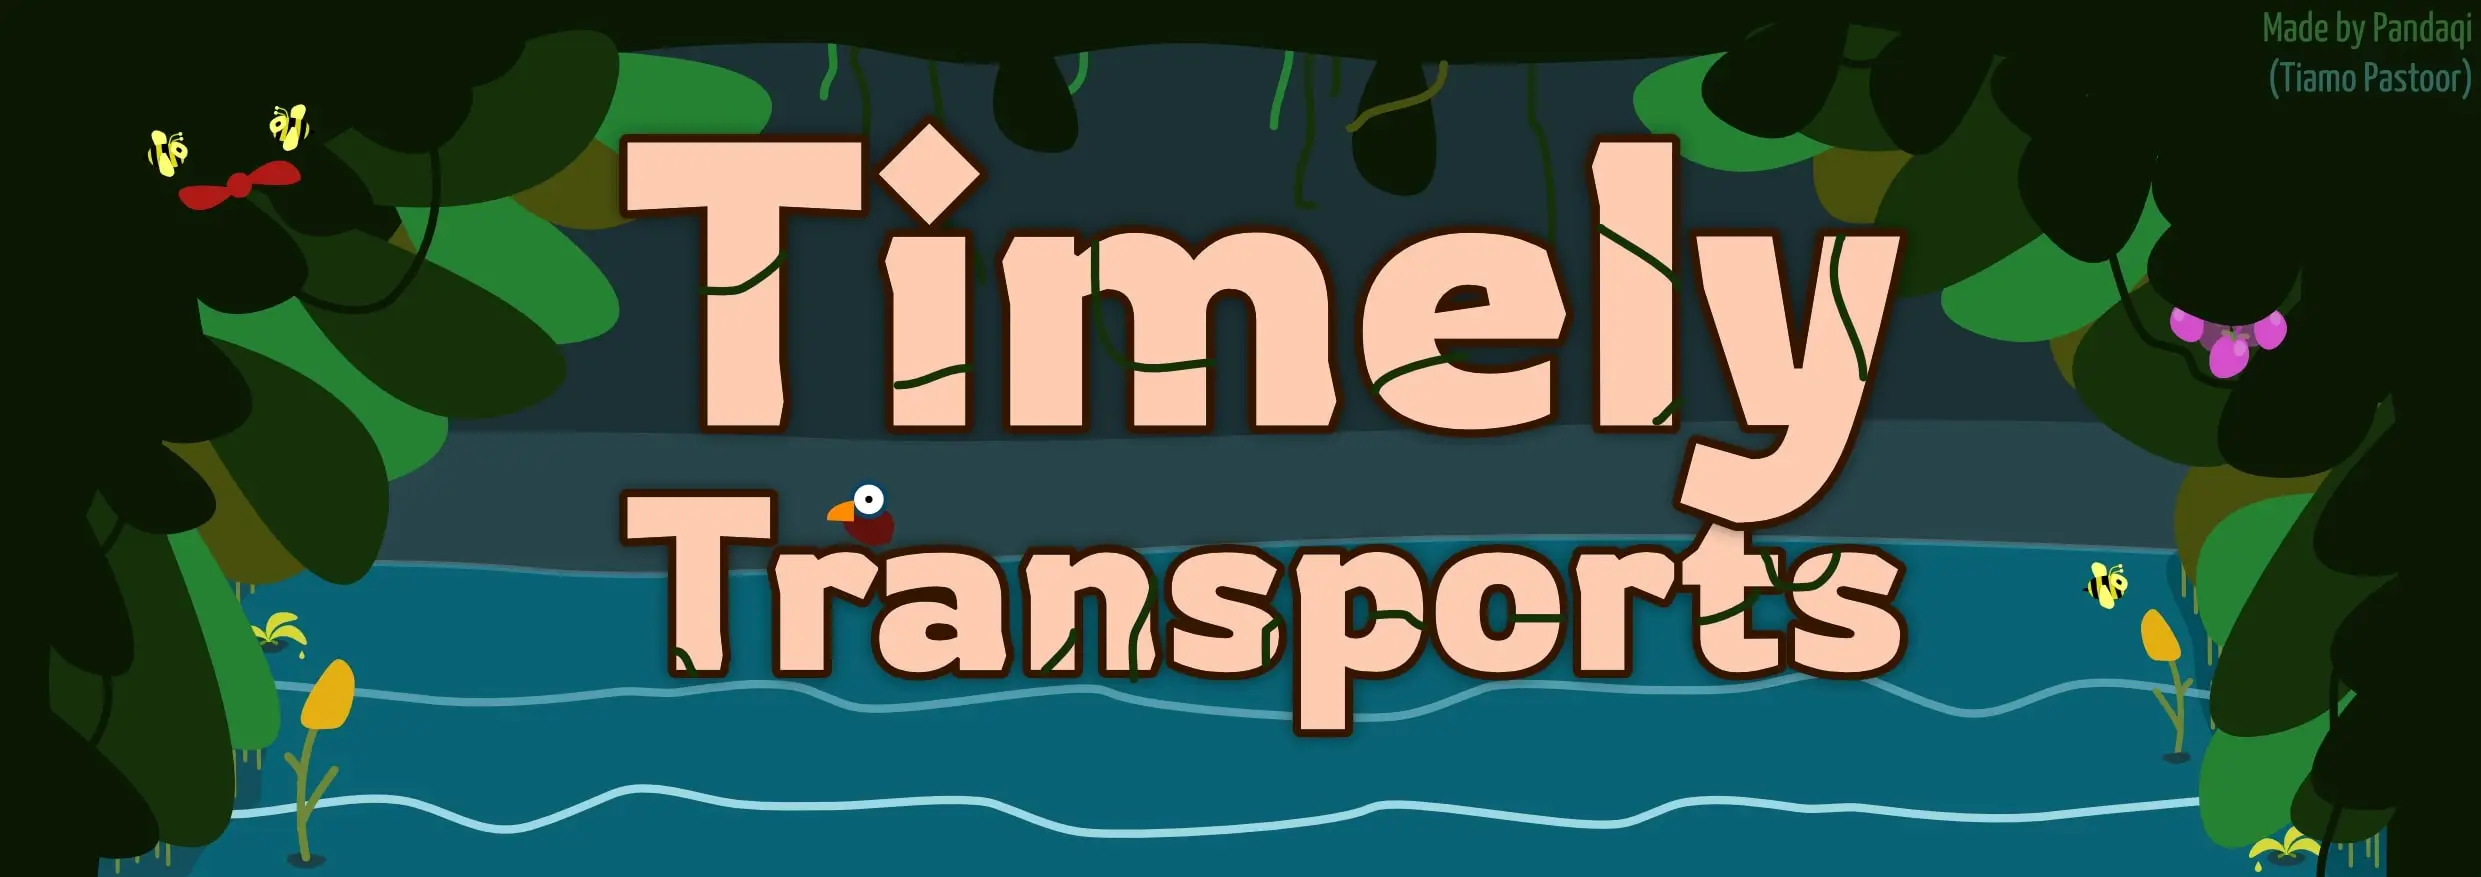 Thumbnail / Header for article: Timely Transports (Part 2)